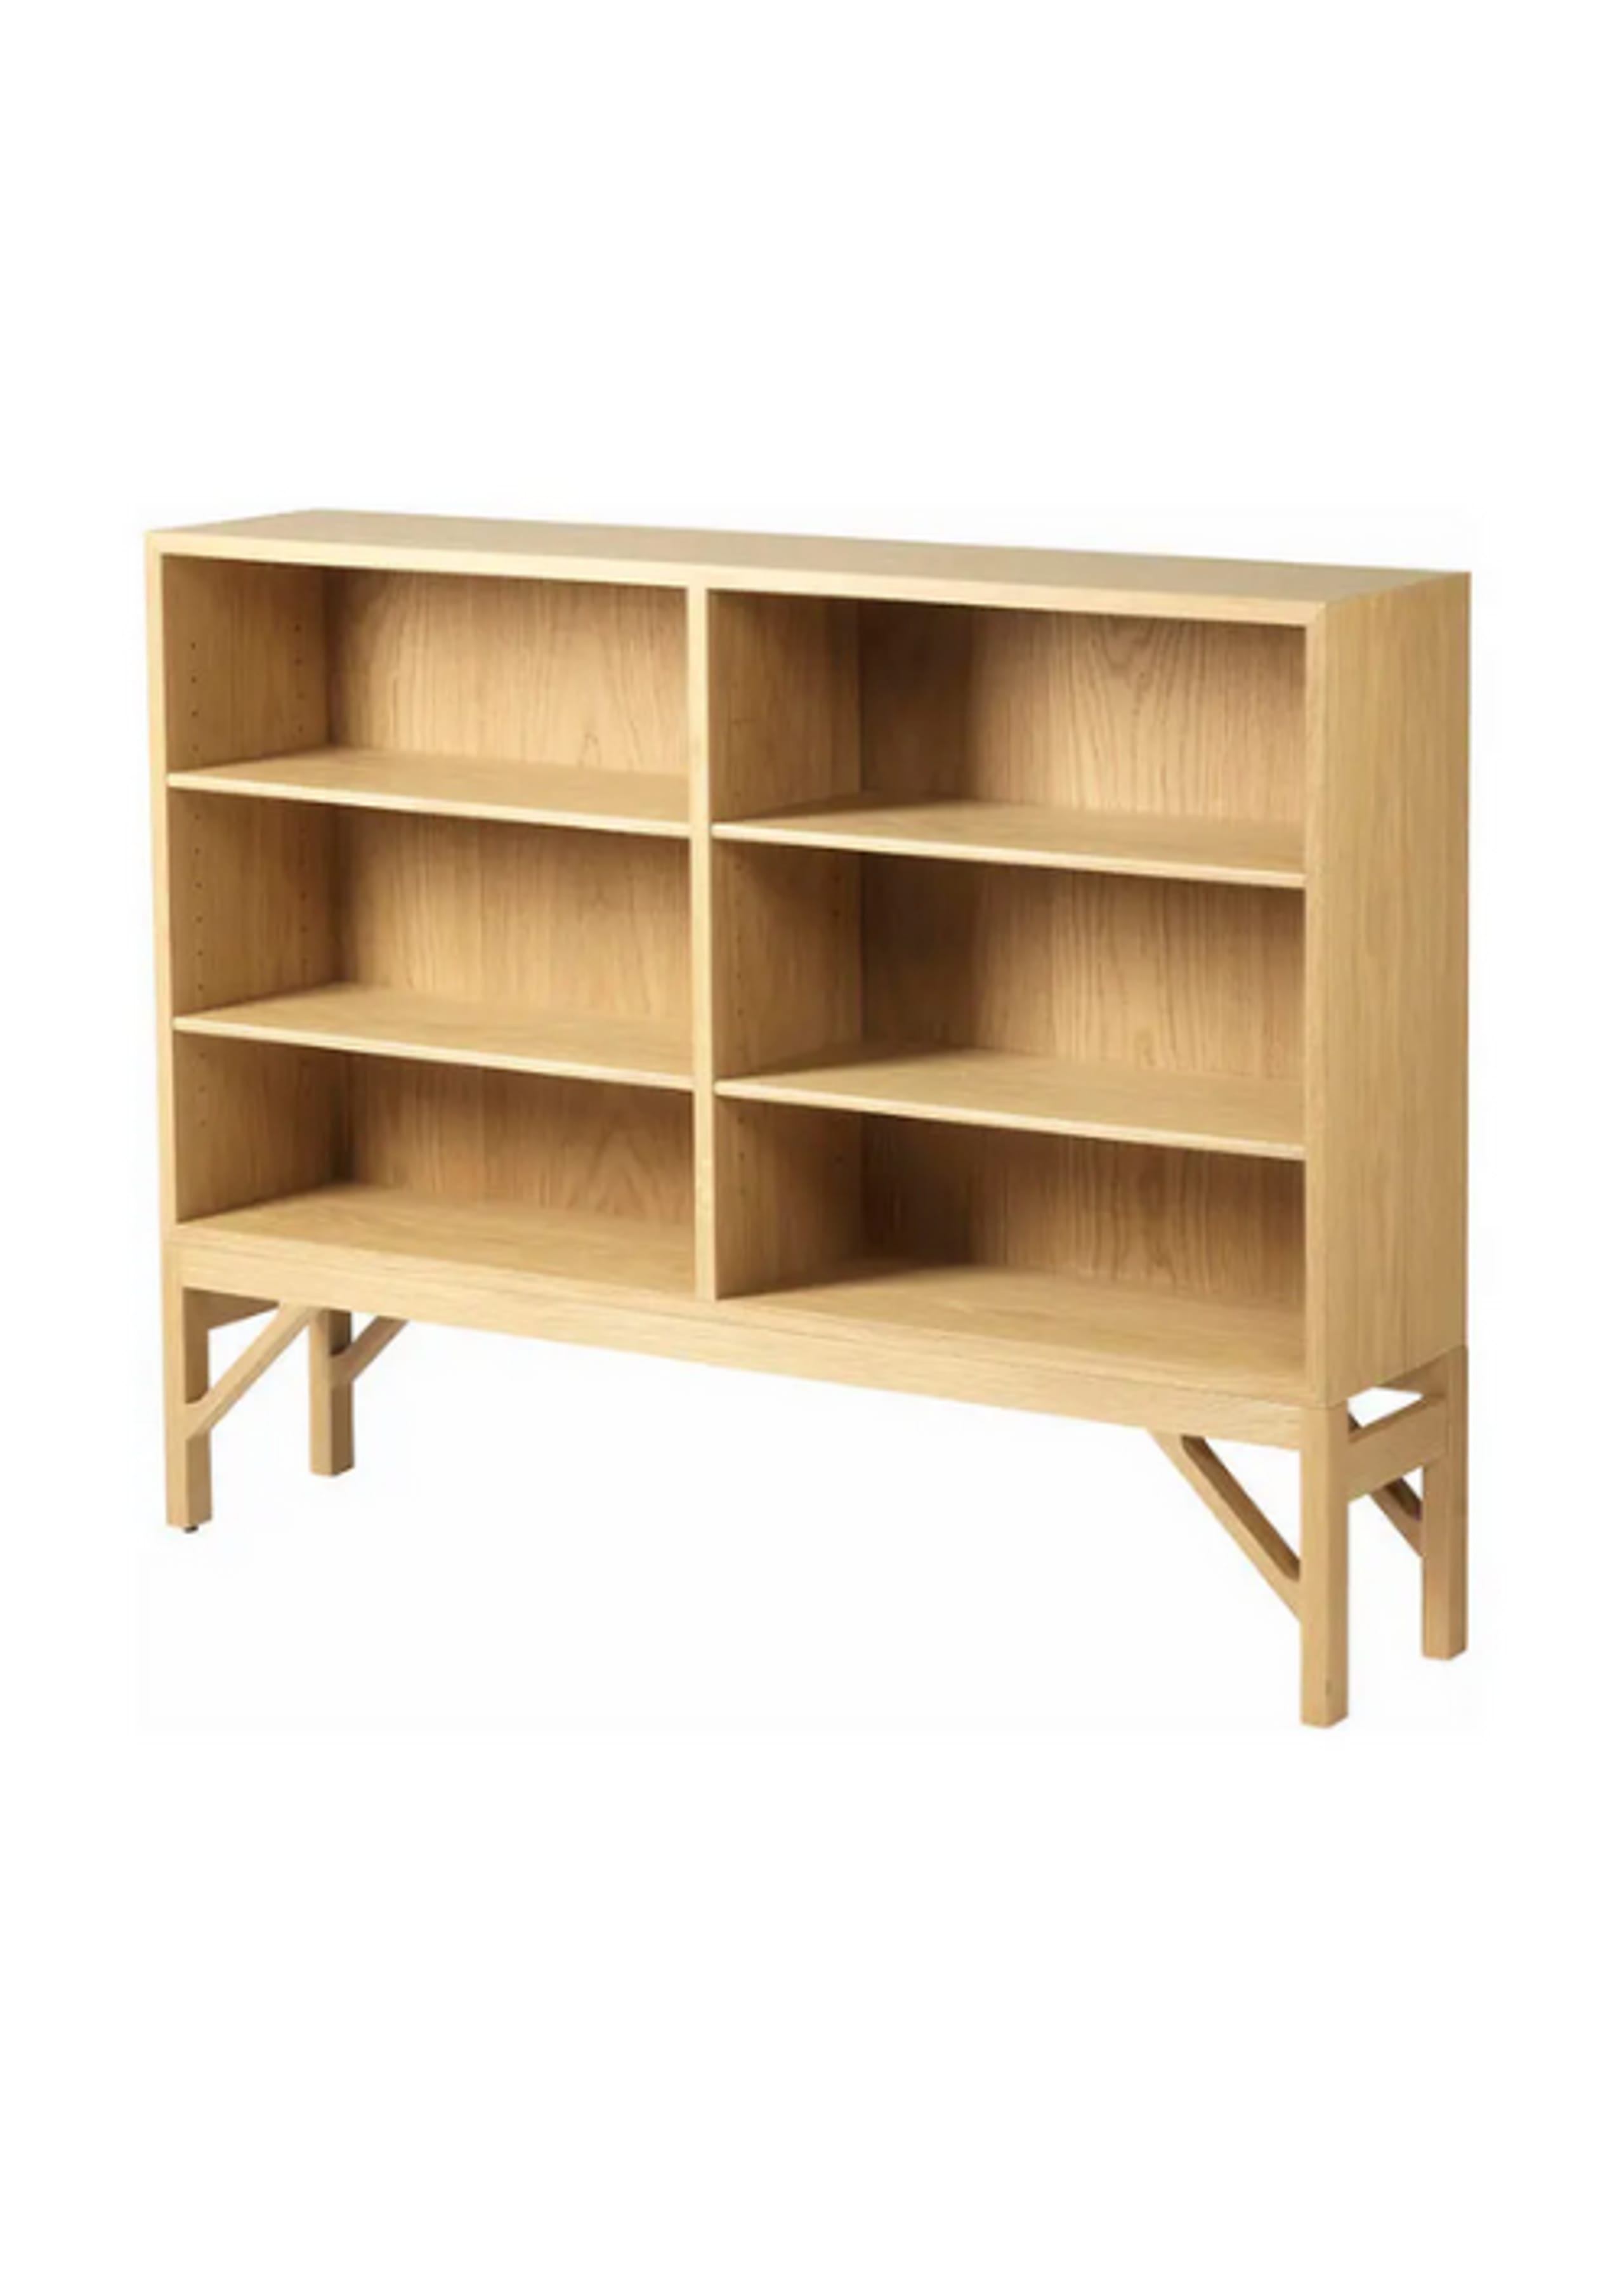 FDB Møbler / Furniture - Display - A153 - Reol - Oak - Lacquered